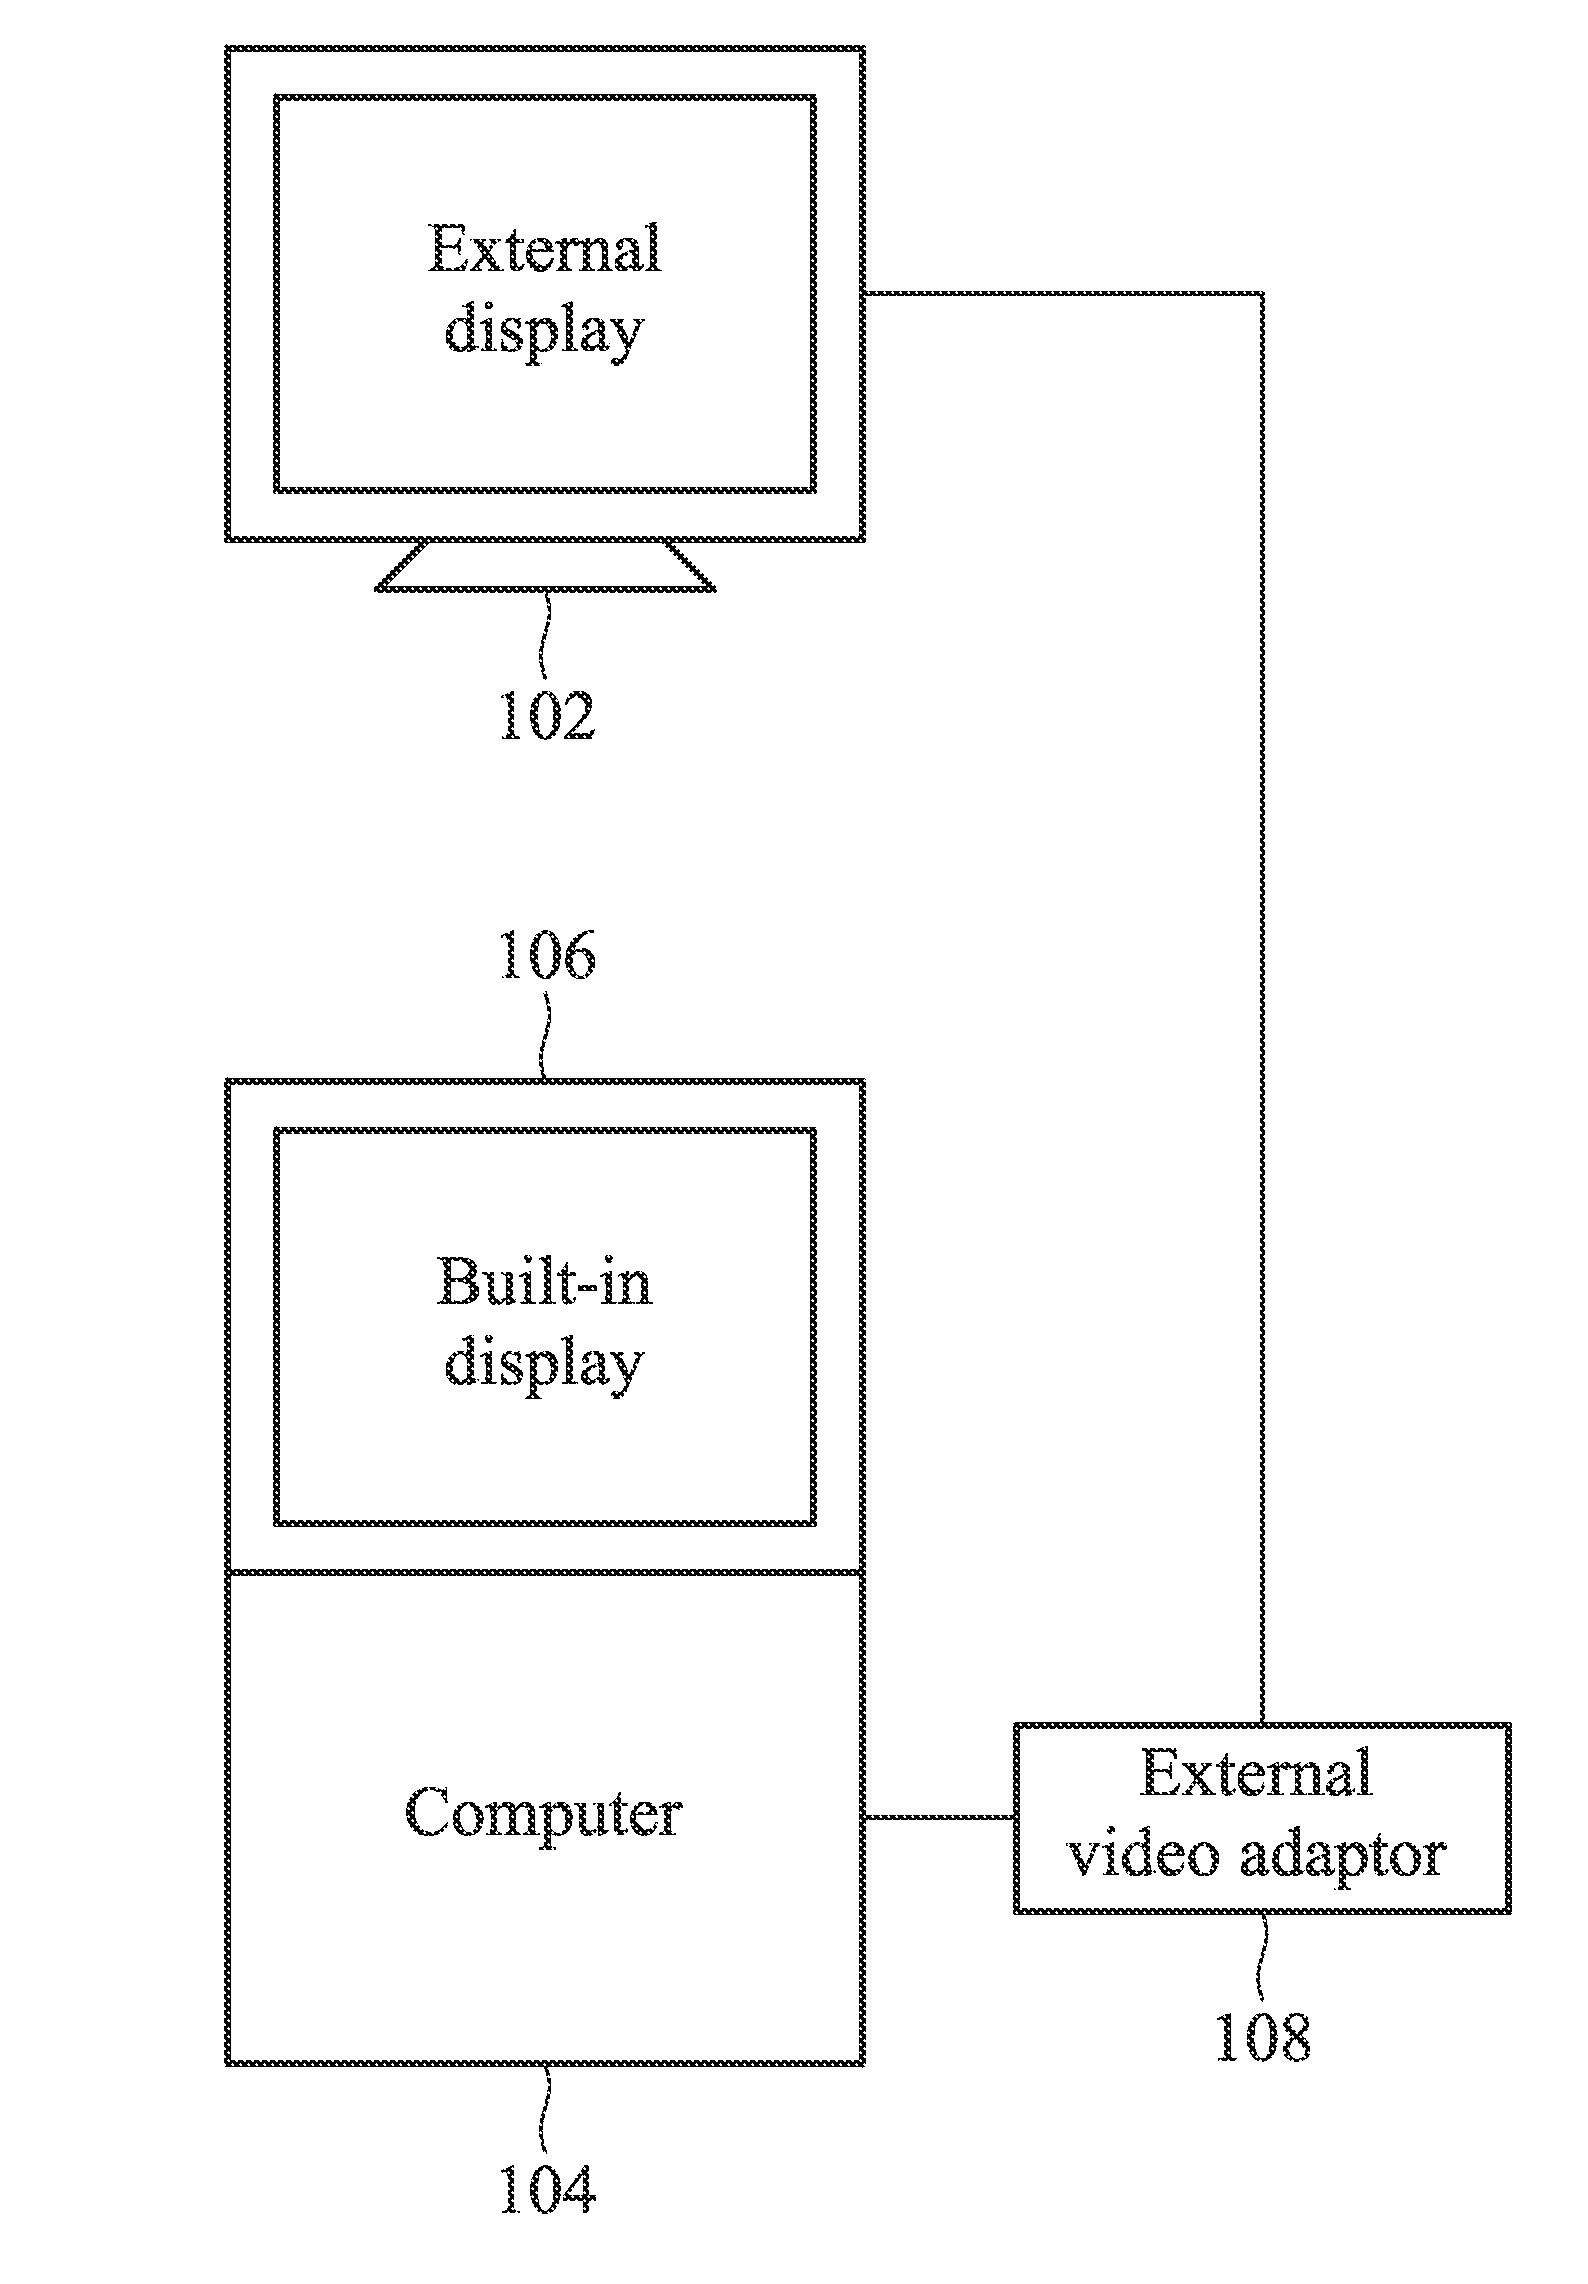 Image processing apparatuses and external image appratus